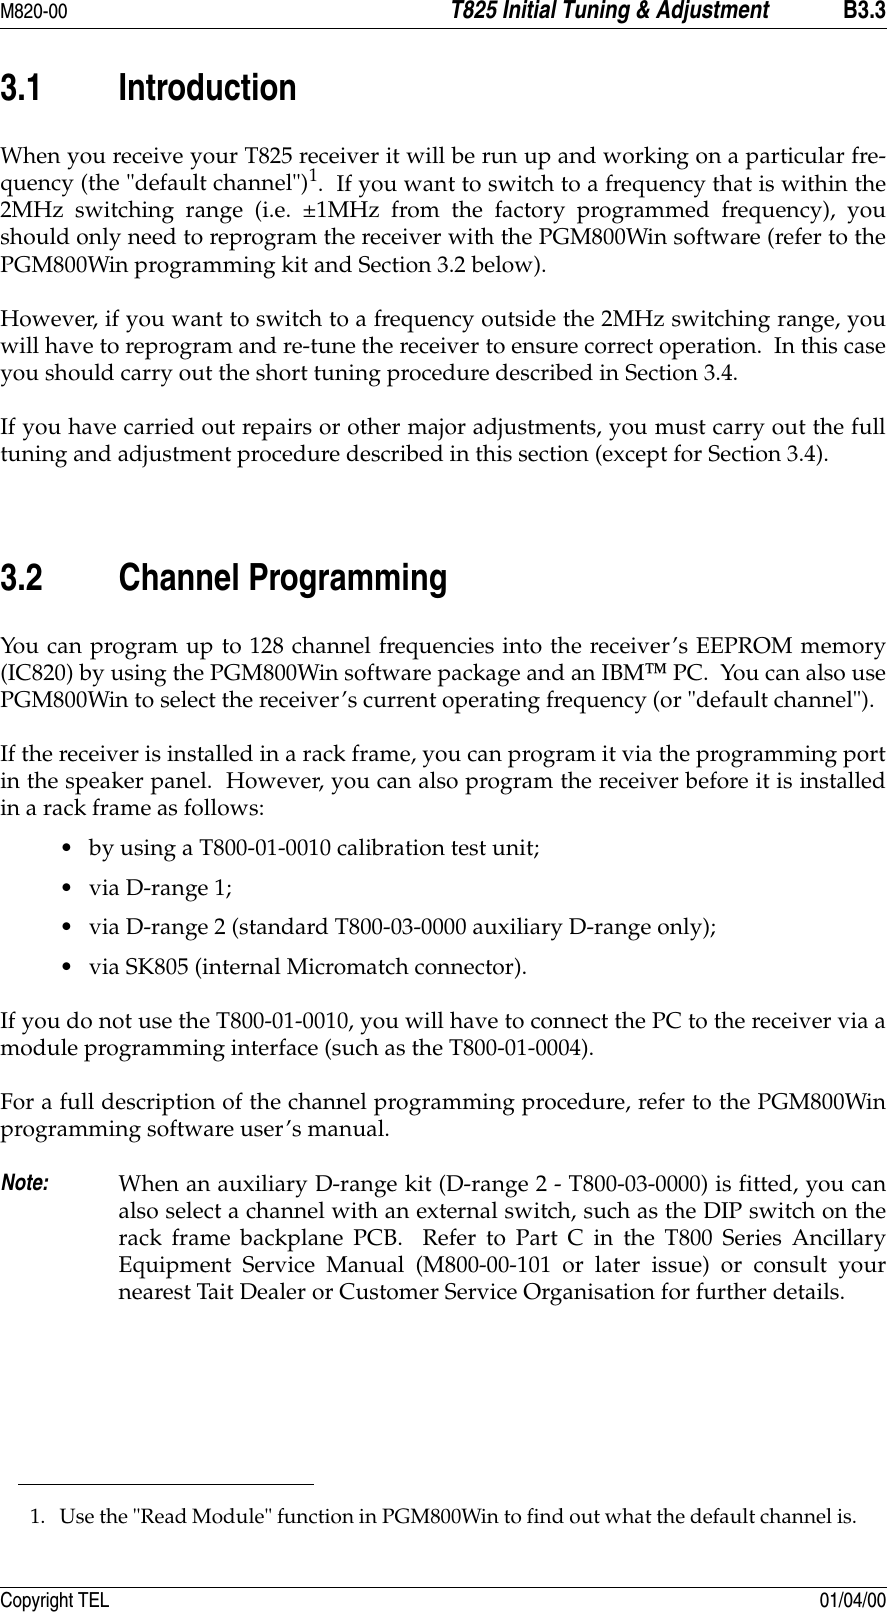 M820-00 T825 Initial Tuning &amp; Adjustment B3.3Copyright TEL 01/04/003.1 IntroductionWhen you receive your T825 receiver it will be run up and working on a particular fre-quency (the &quot;default channel&quot;)1.  If you want to switch to a frequency that is within the2MHz switching range (i.e. ±1MHz from the factory programmed frequency), youshould only need to reprogram the receiver with the PGM800Win software (refer to thePGM800Win programming kit and Section 3.2 below).  However, if you want to switch to a frequency outside the 2MHz switching range, youwill have to reprogram and re-tune the receiver to ensure correct operation.  In this caseyou should carry out the short tuning procedure described in Section 3.4.If you have carried out repairs or other major adjustments, you must carry out the fulltuning and adjustment procedure described in this section (except for Section 3.4).  3.2 Channel ProgrammingYou can program up to 128 channel frequencies into the receiver’s EEPROM memory(IC820) by using the PGM800Win software package and an IBM PC.  You can also usePGM800Win to select the receiver’s current operating frequency (or &quot;default channel&quot;).If the receiver is installed in a rack frame, you can program it via the programming portin the speaker panel.  However, you can also program the receiver before it is installedin a rack frame as follows:• by using a T800-01-0010 calibration test unit;•via D-range 1;• via D-range 2 (standard T800-03-0000 auxiliary D-range only);• via SK805 (internal Micromatch connector).If you do not use the T800-01-0010, you will have to connect the PC to the receiver via amodule programming interface (such as the T800-01-0004).For a full description of the channel programming procedure, refer to the PGM800Winprogramming software user’s manual.Note: When an auxiliary D-range kit (D-range 2 - T800-03-0000) is fitted, you canalso select a channel with an external switch, such as the DIP switch on therack frame backplane PCB.  Refer to Part C in the T800 Series AncillaryEquipment Service Manual (M800-00-101 or later issue) or consult yournearest Tait Dealer or Customer Service Organisation for further details.1. Use the &quot;Read Module&quot; function in PGM800Win to find out what the default channel is.